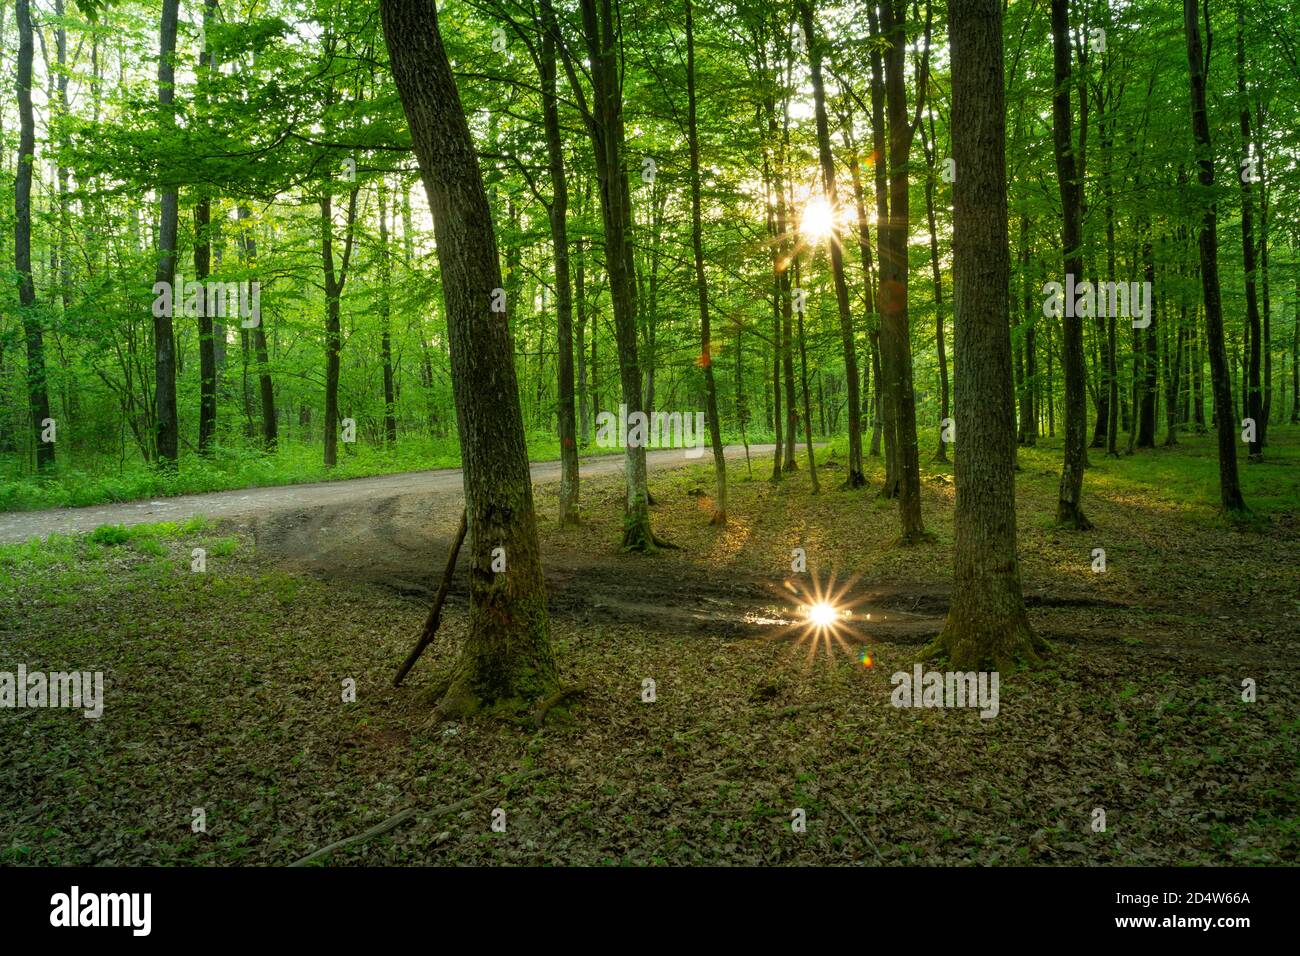 The dirt road and sunshine in the green forest Stock Photo